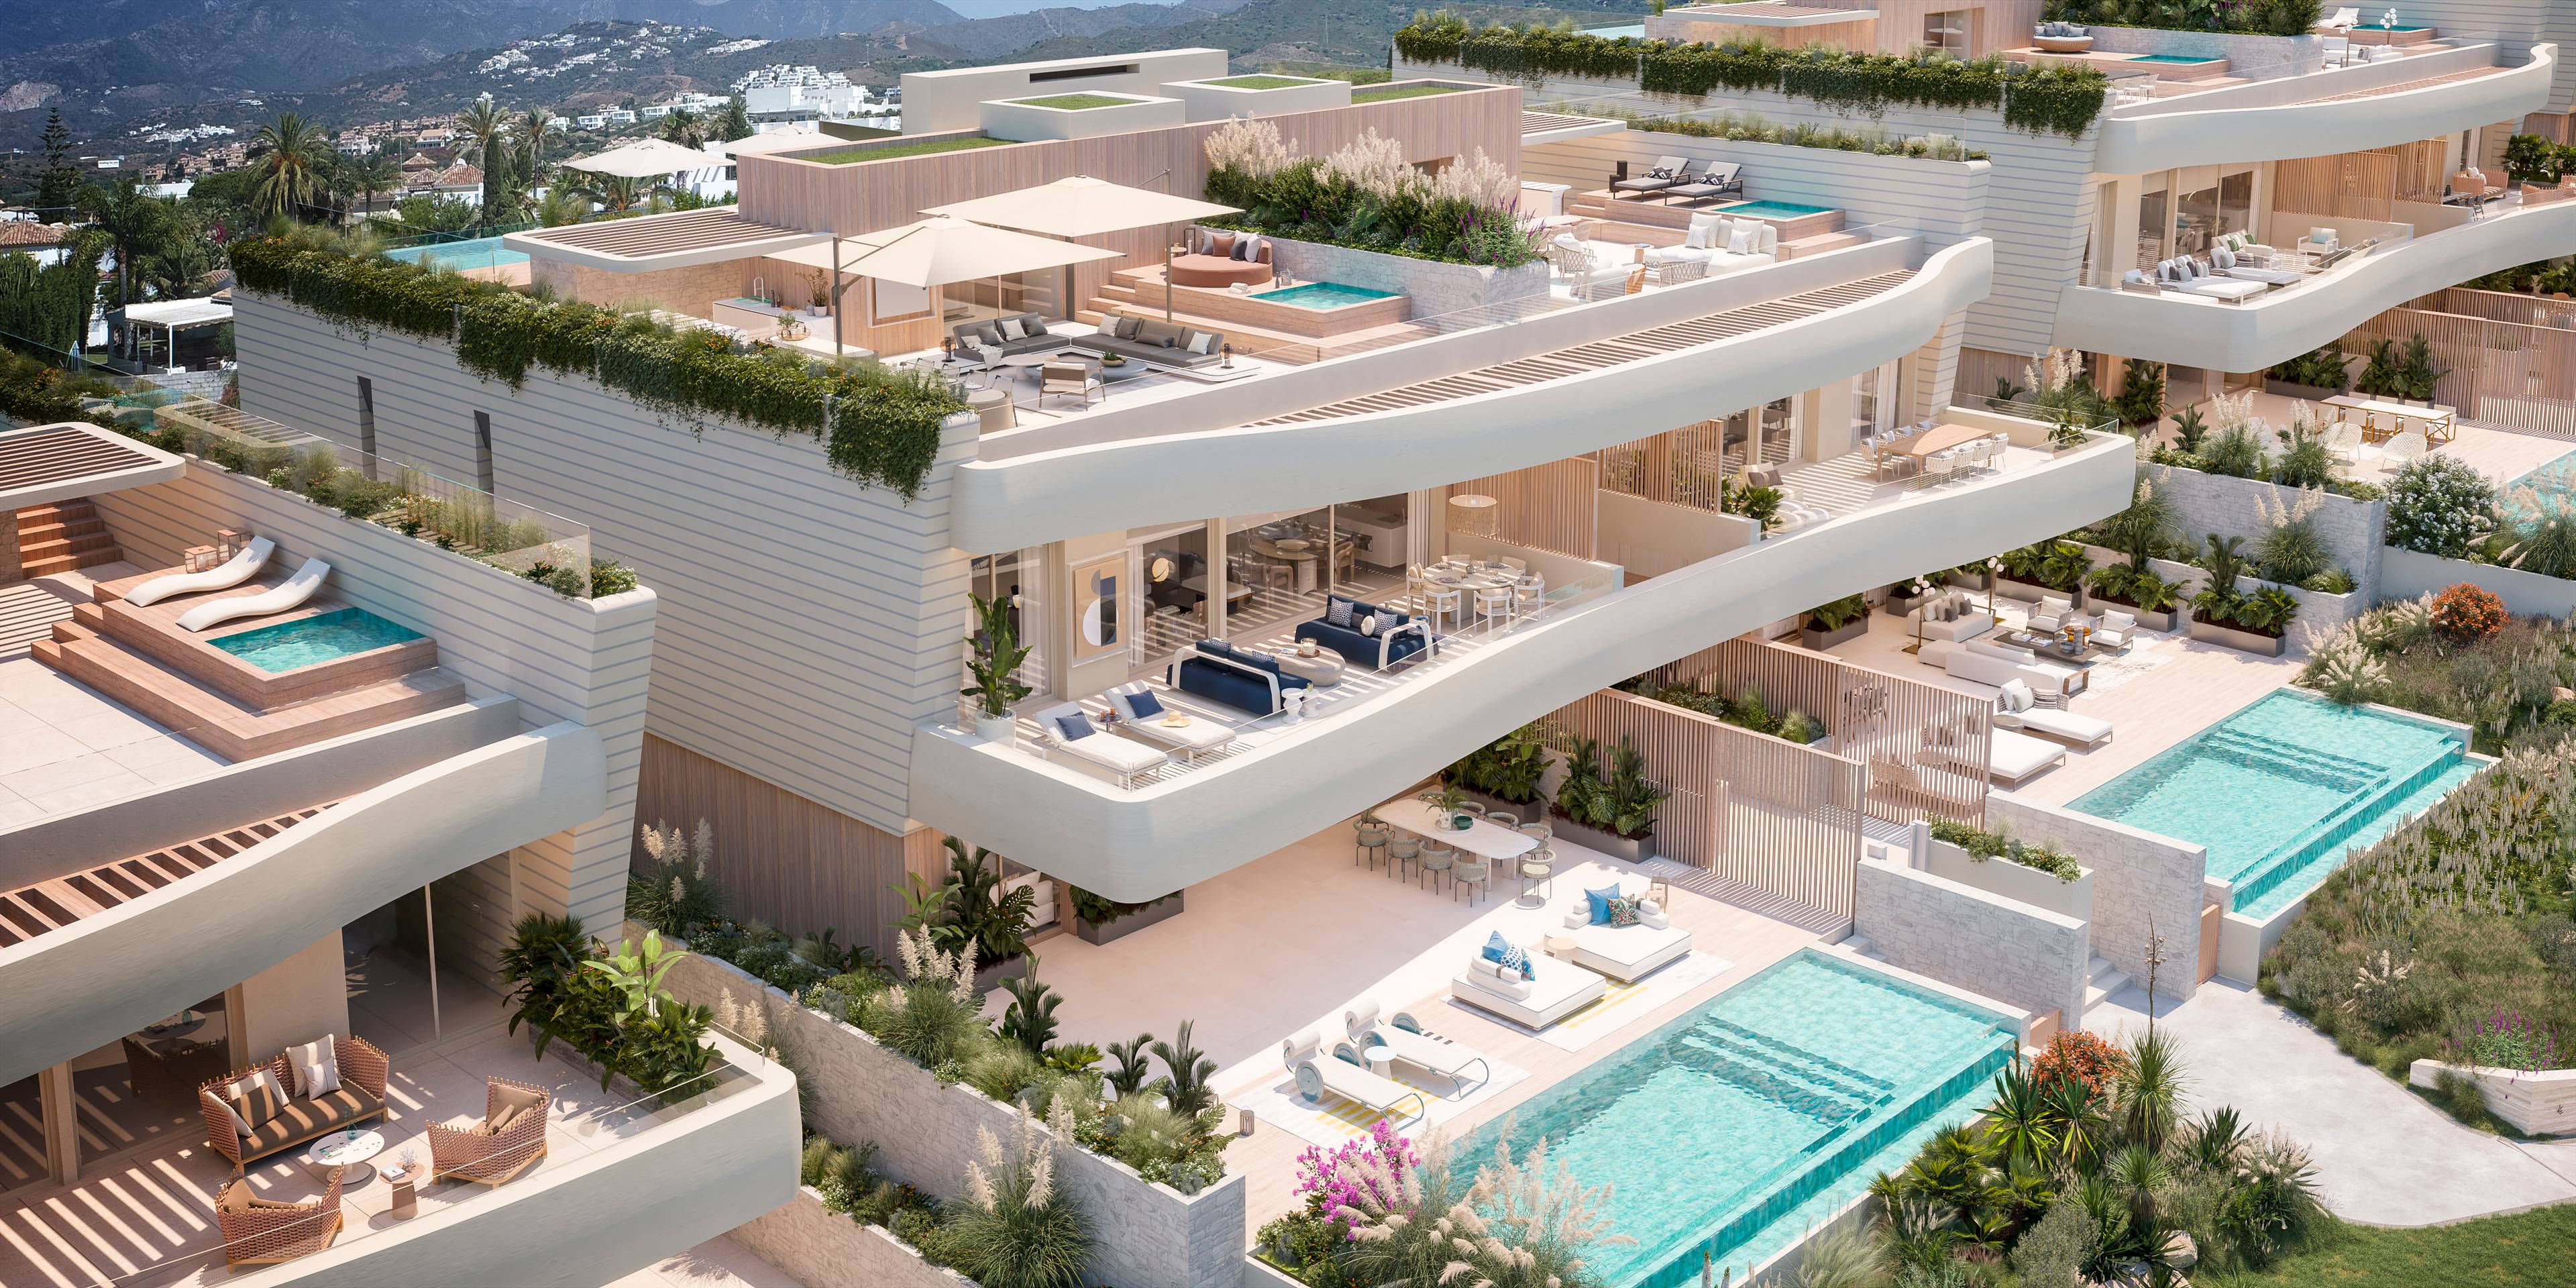 Under Construction - Welcome To The Incomparable World Of Dunique Marbella - Beachfront 2, 3 & 4 Bed Apartments & Villas For Sale